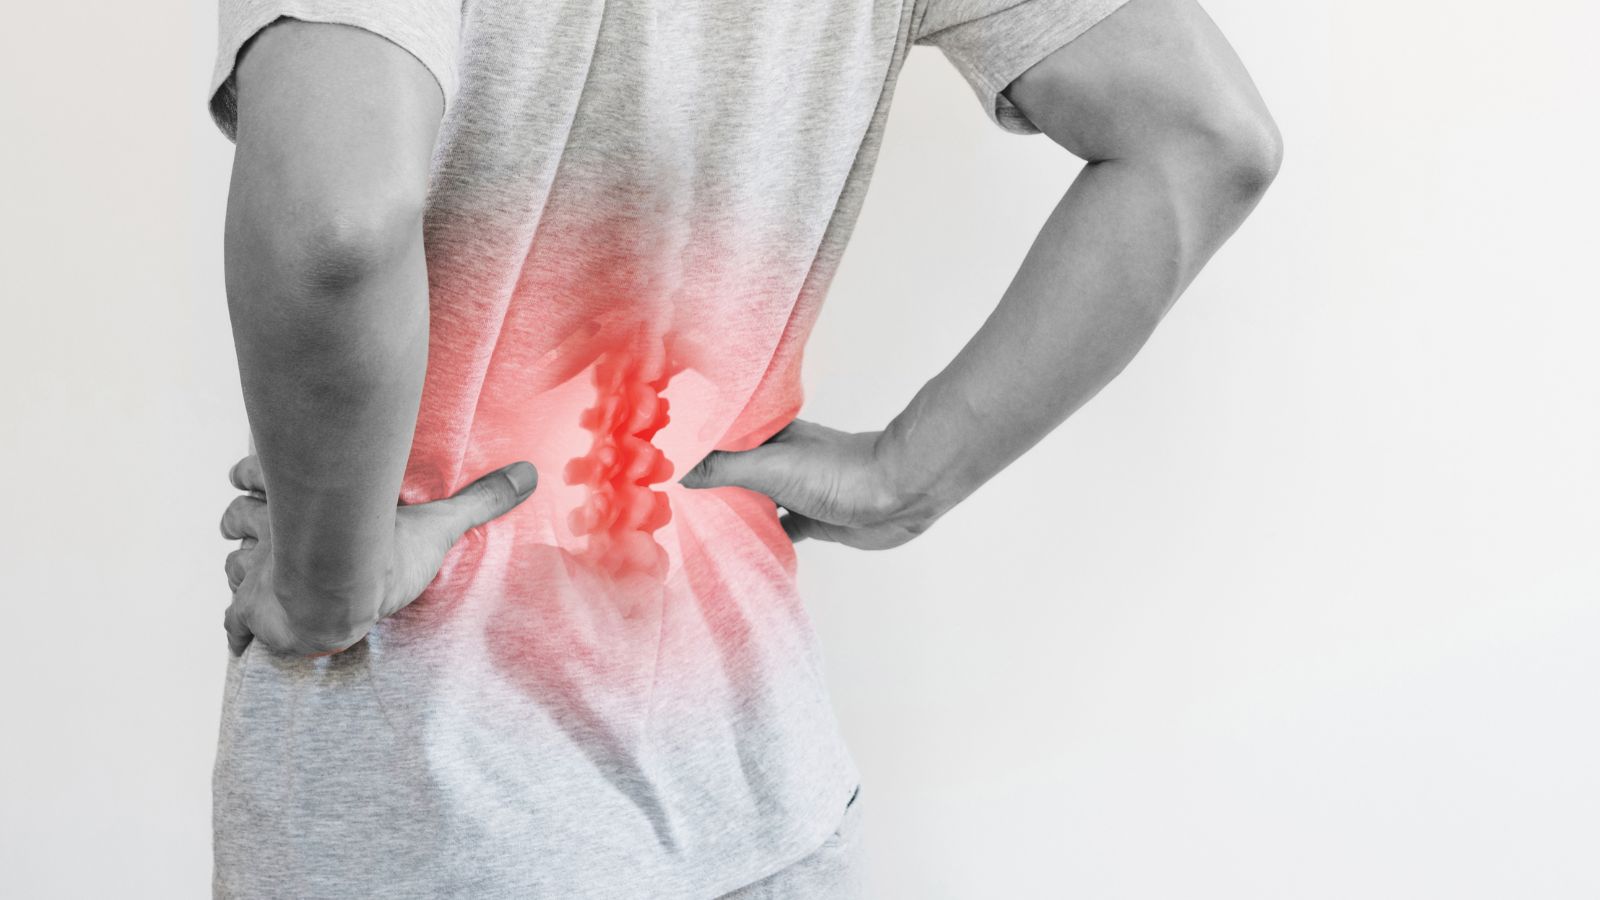 A man touched his lower back at the pain point because of the herniated intervertebral disc.